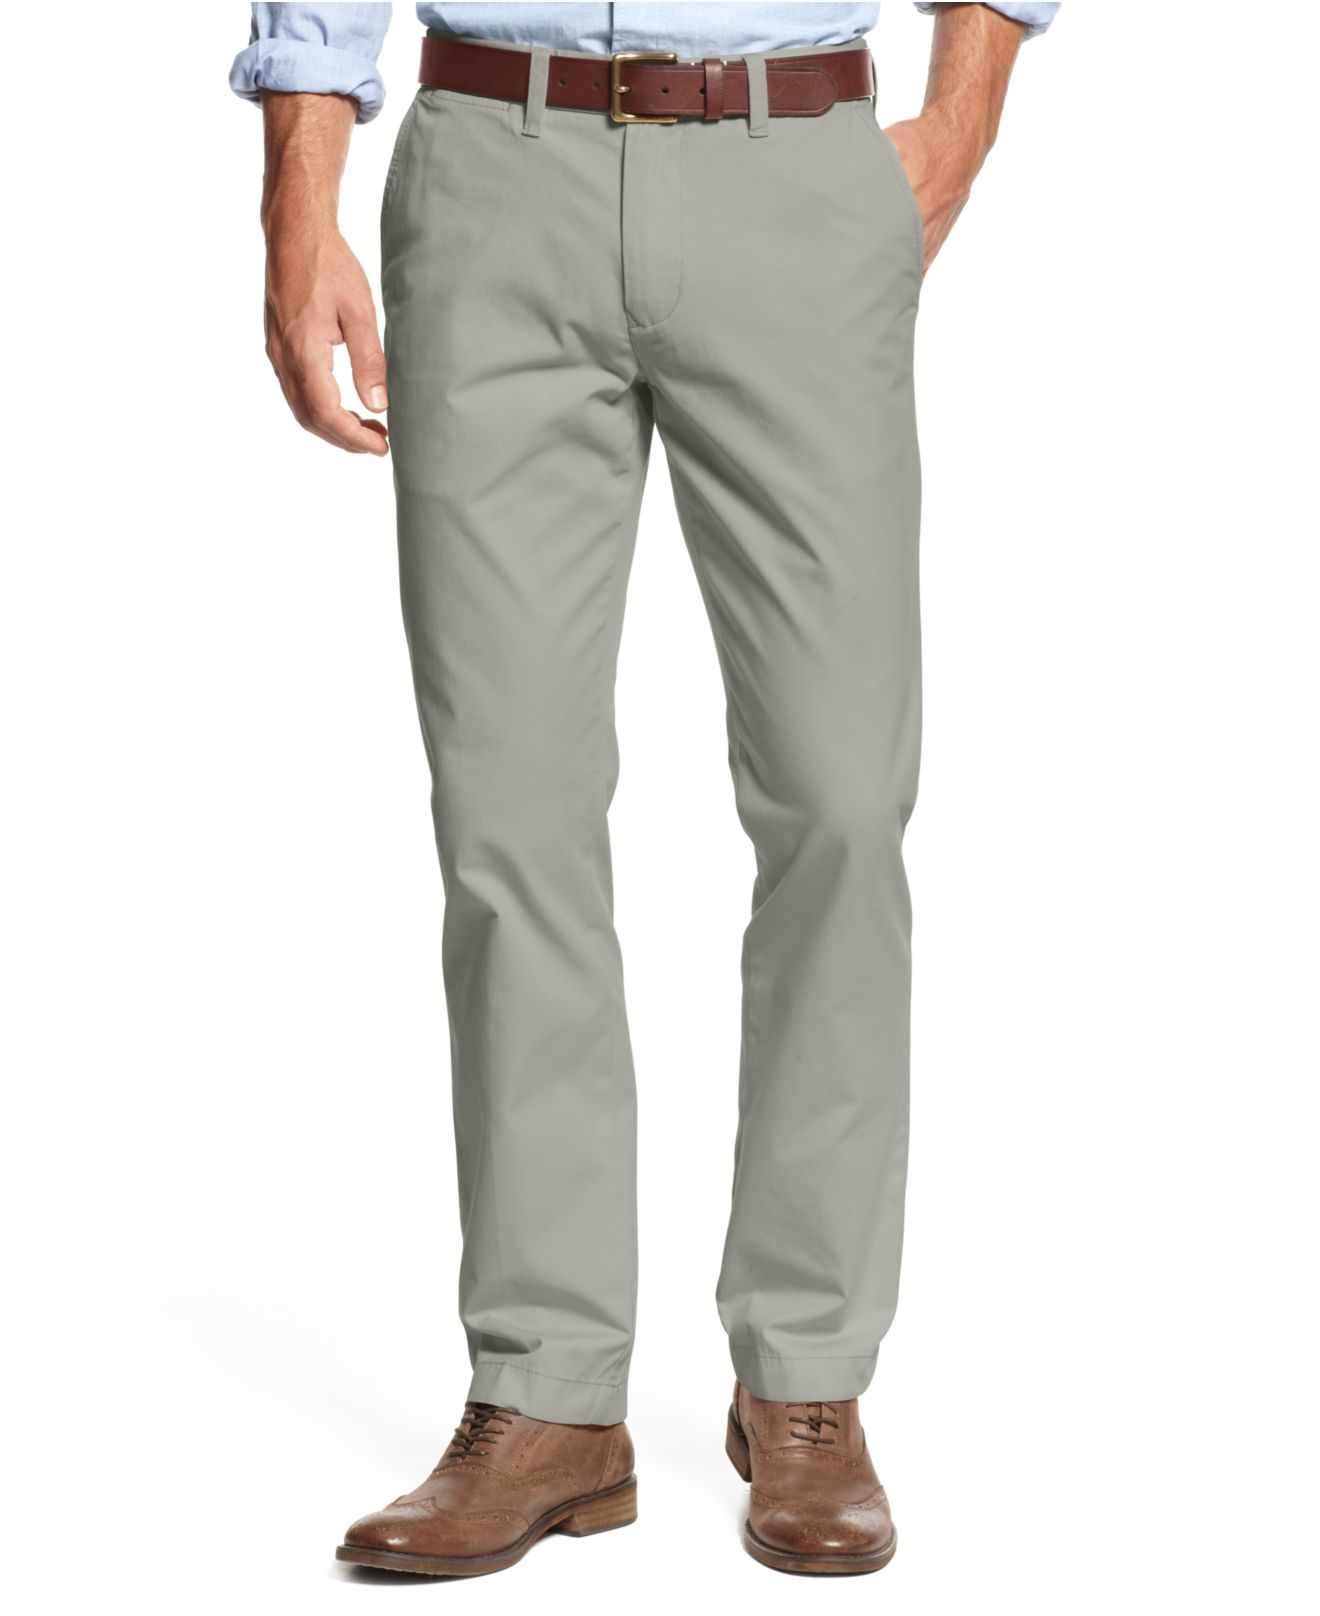 Tommy Hilfiger Cotton Men's Slim-fit Chino Pants in Gray for Men - Lyst